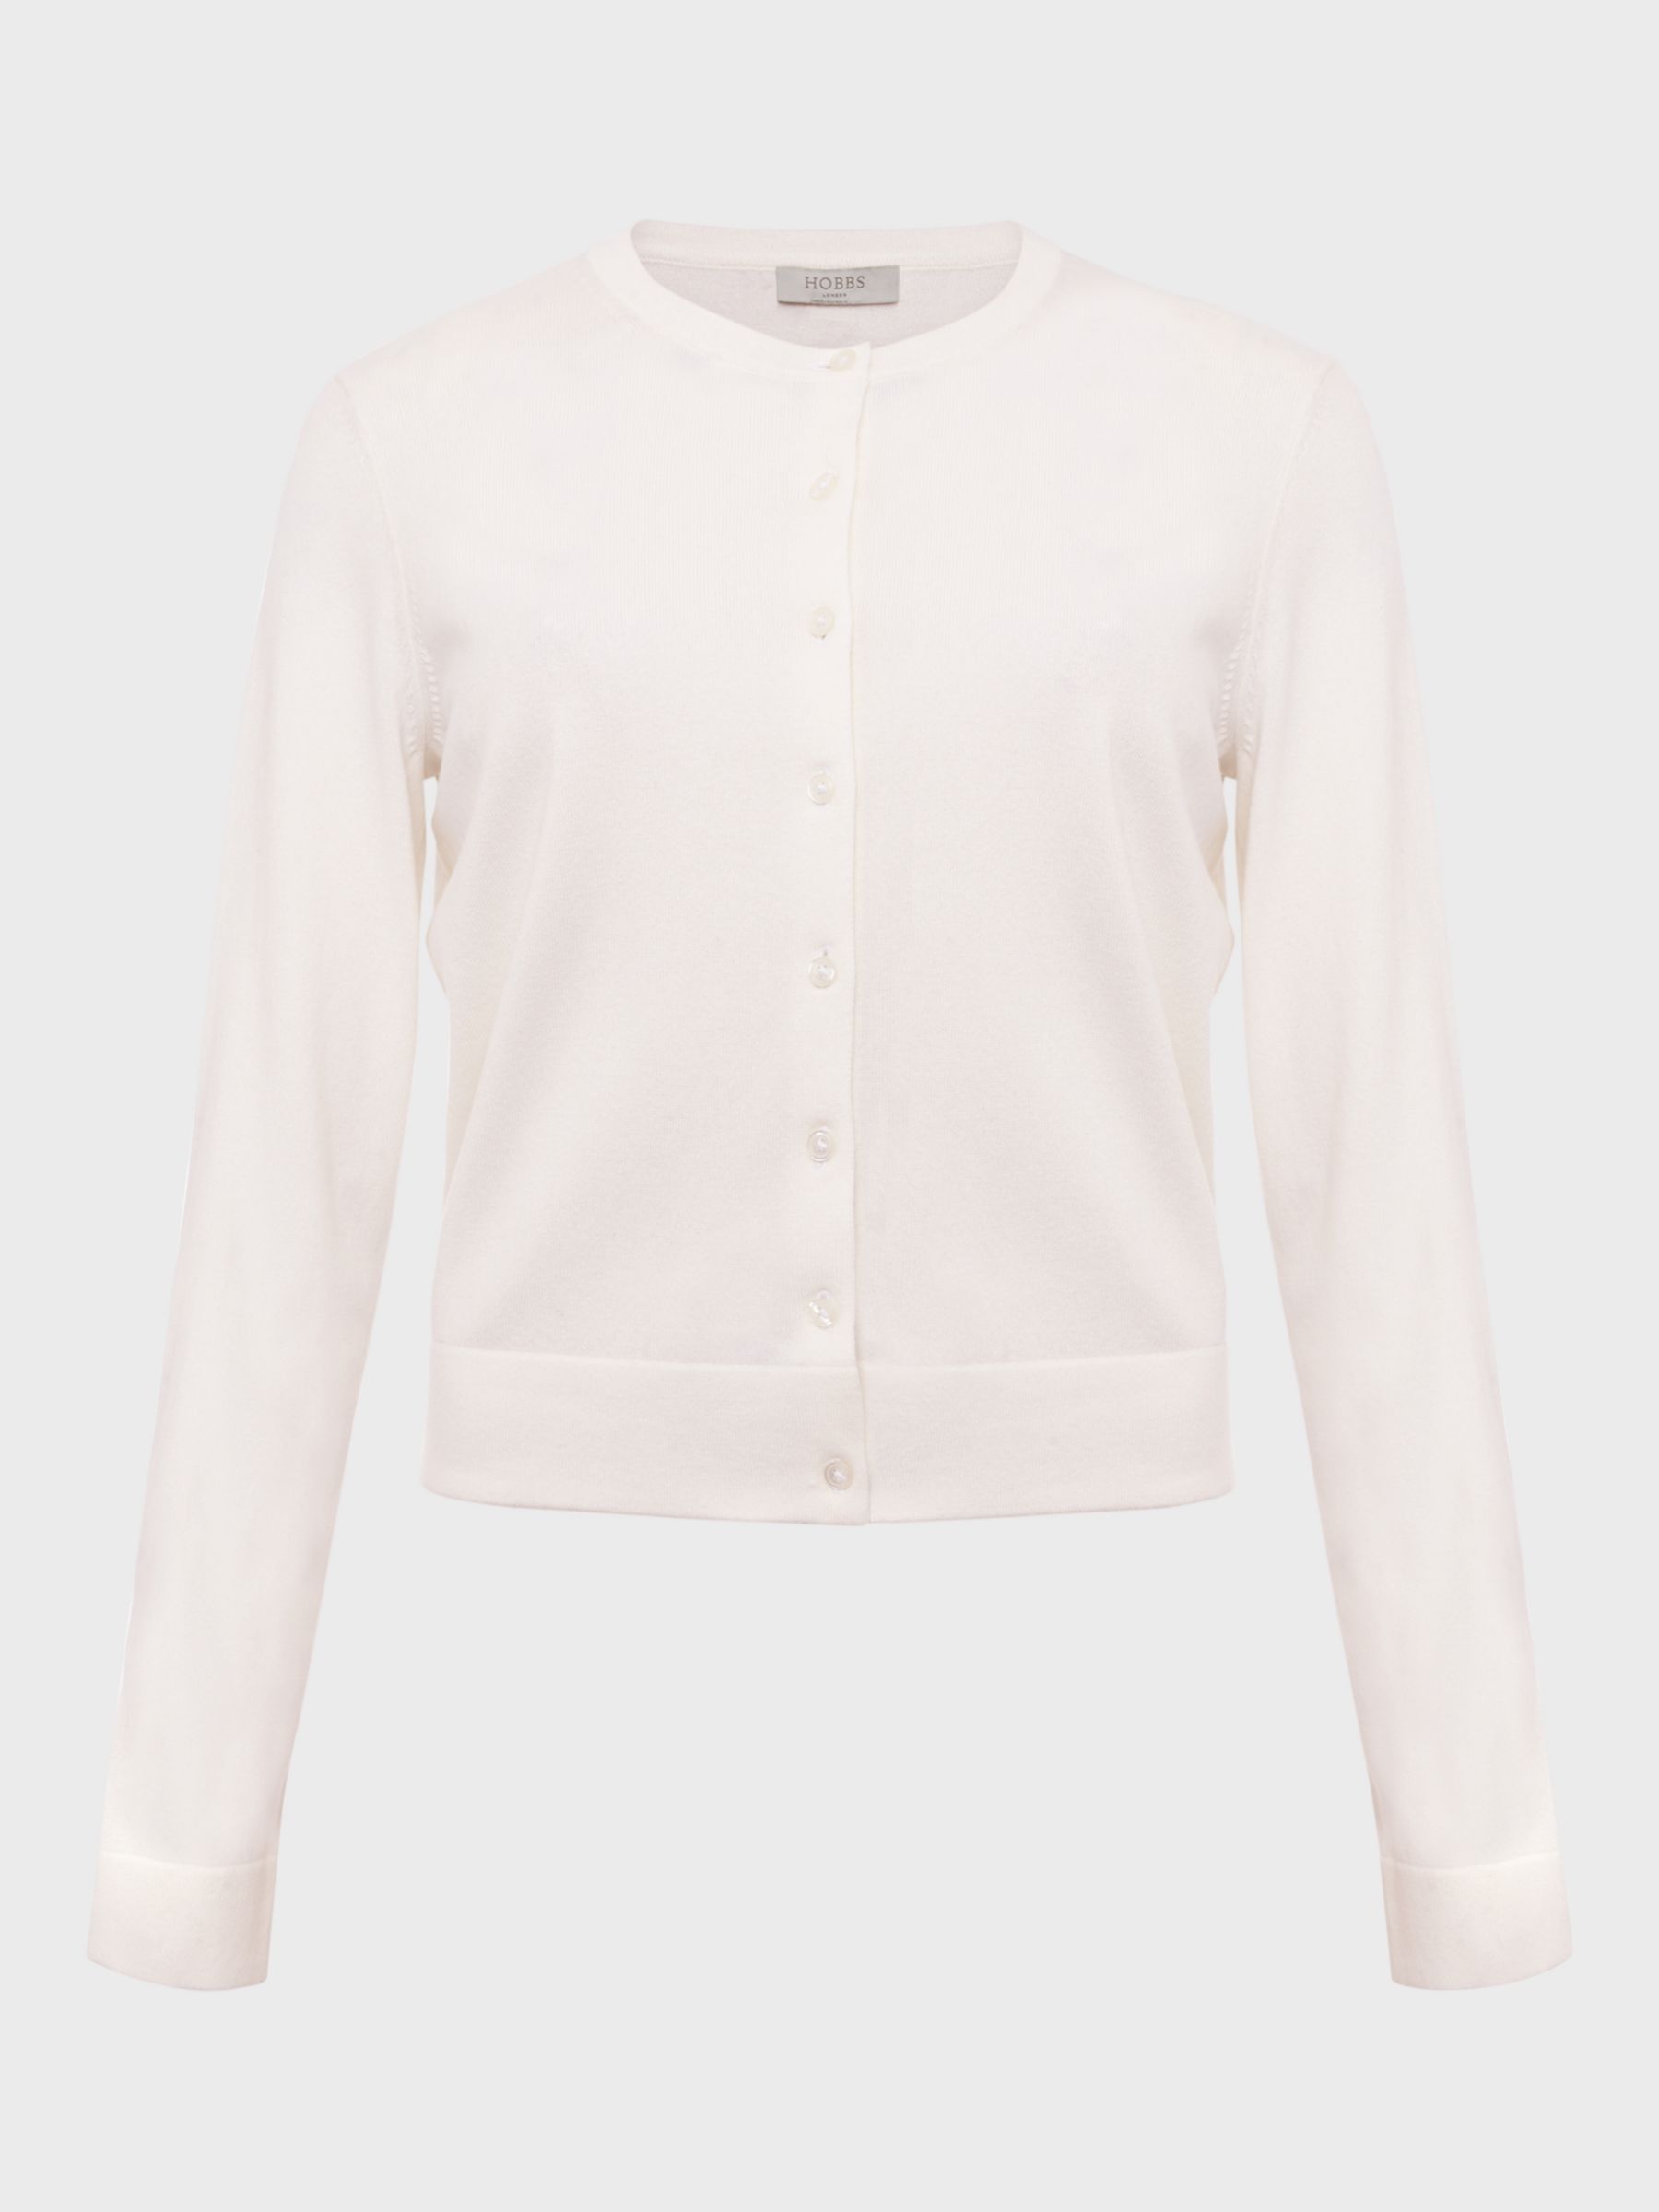 Hobbs Michelle Cotton Blend Cardigan, Ivory at John Lewis & Partners